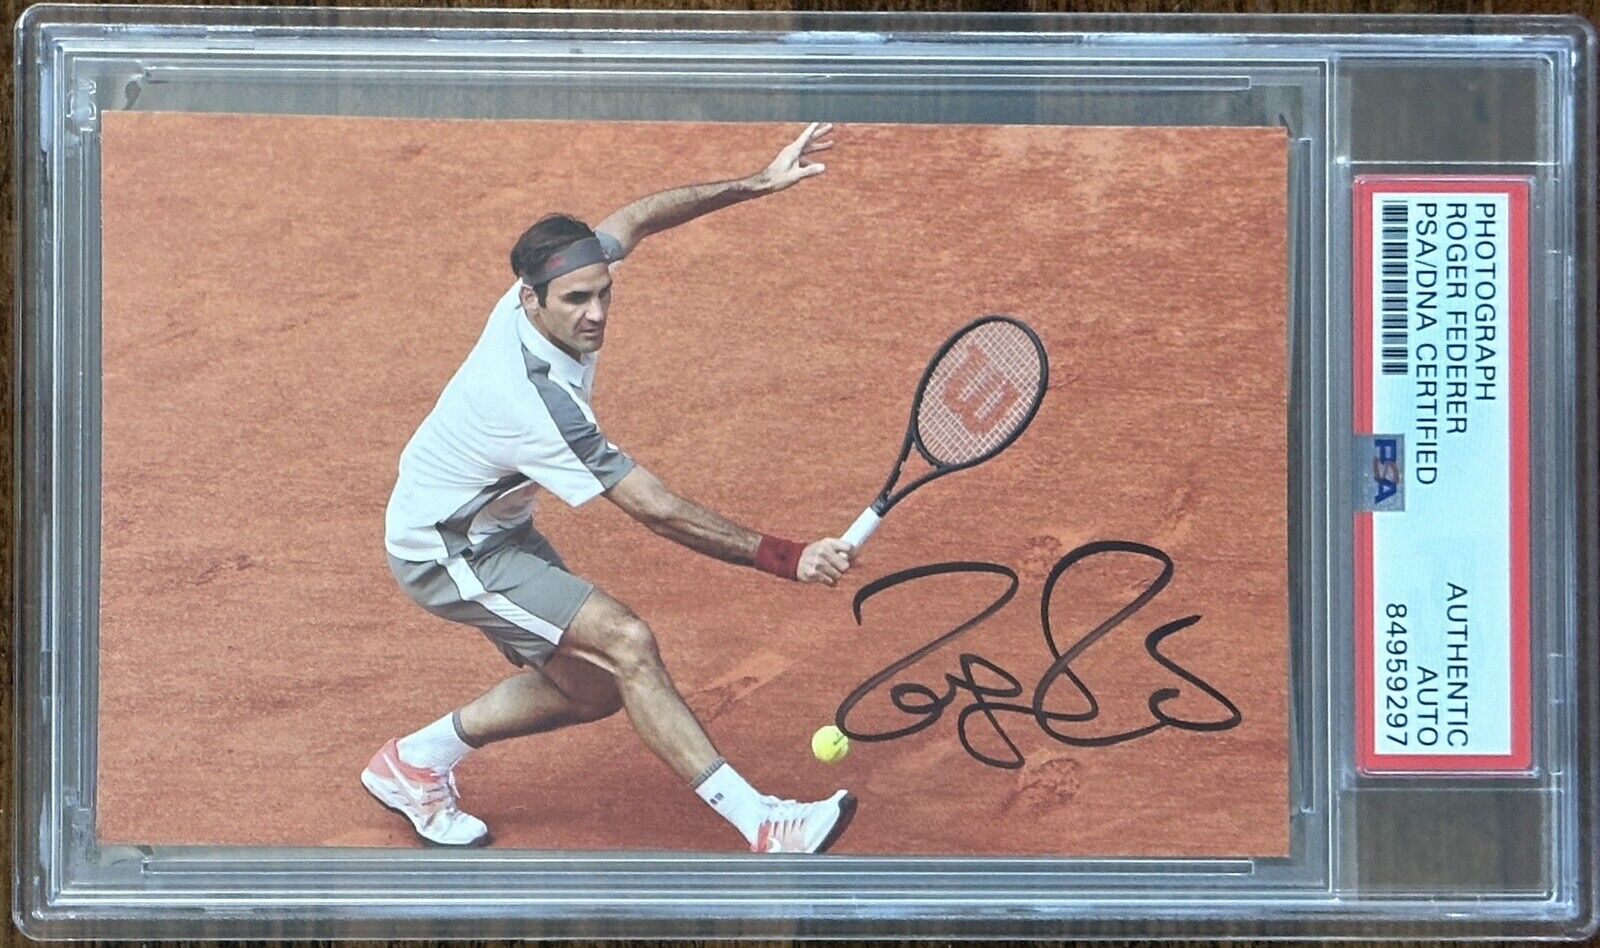 ROGER FEDERER SIGNED WIMBLEDON PHOTOGRAPH PSA DNA CERTIFIED AUTOGRAPH PICTURE